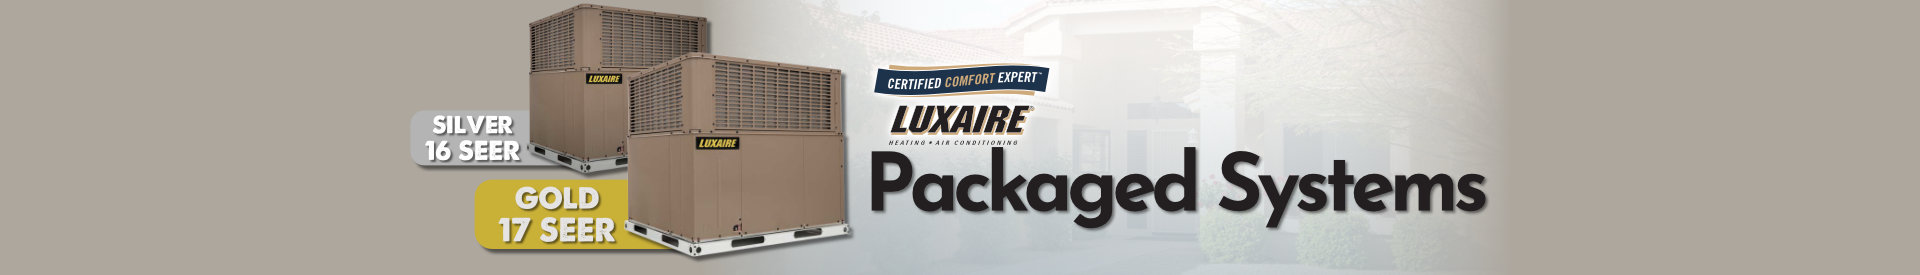 Luxaire Packaged Systems